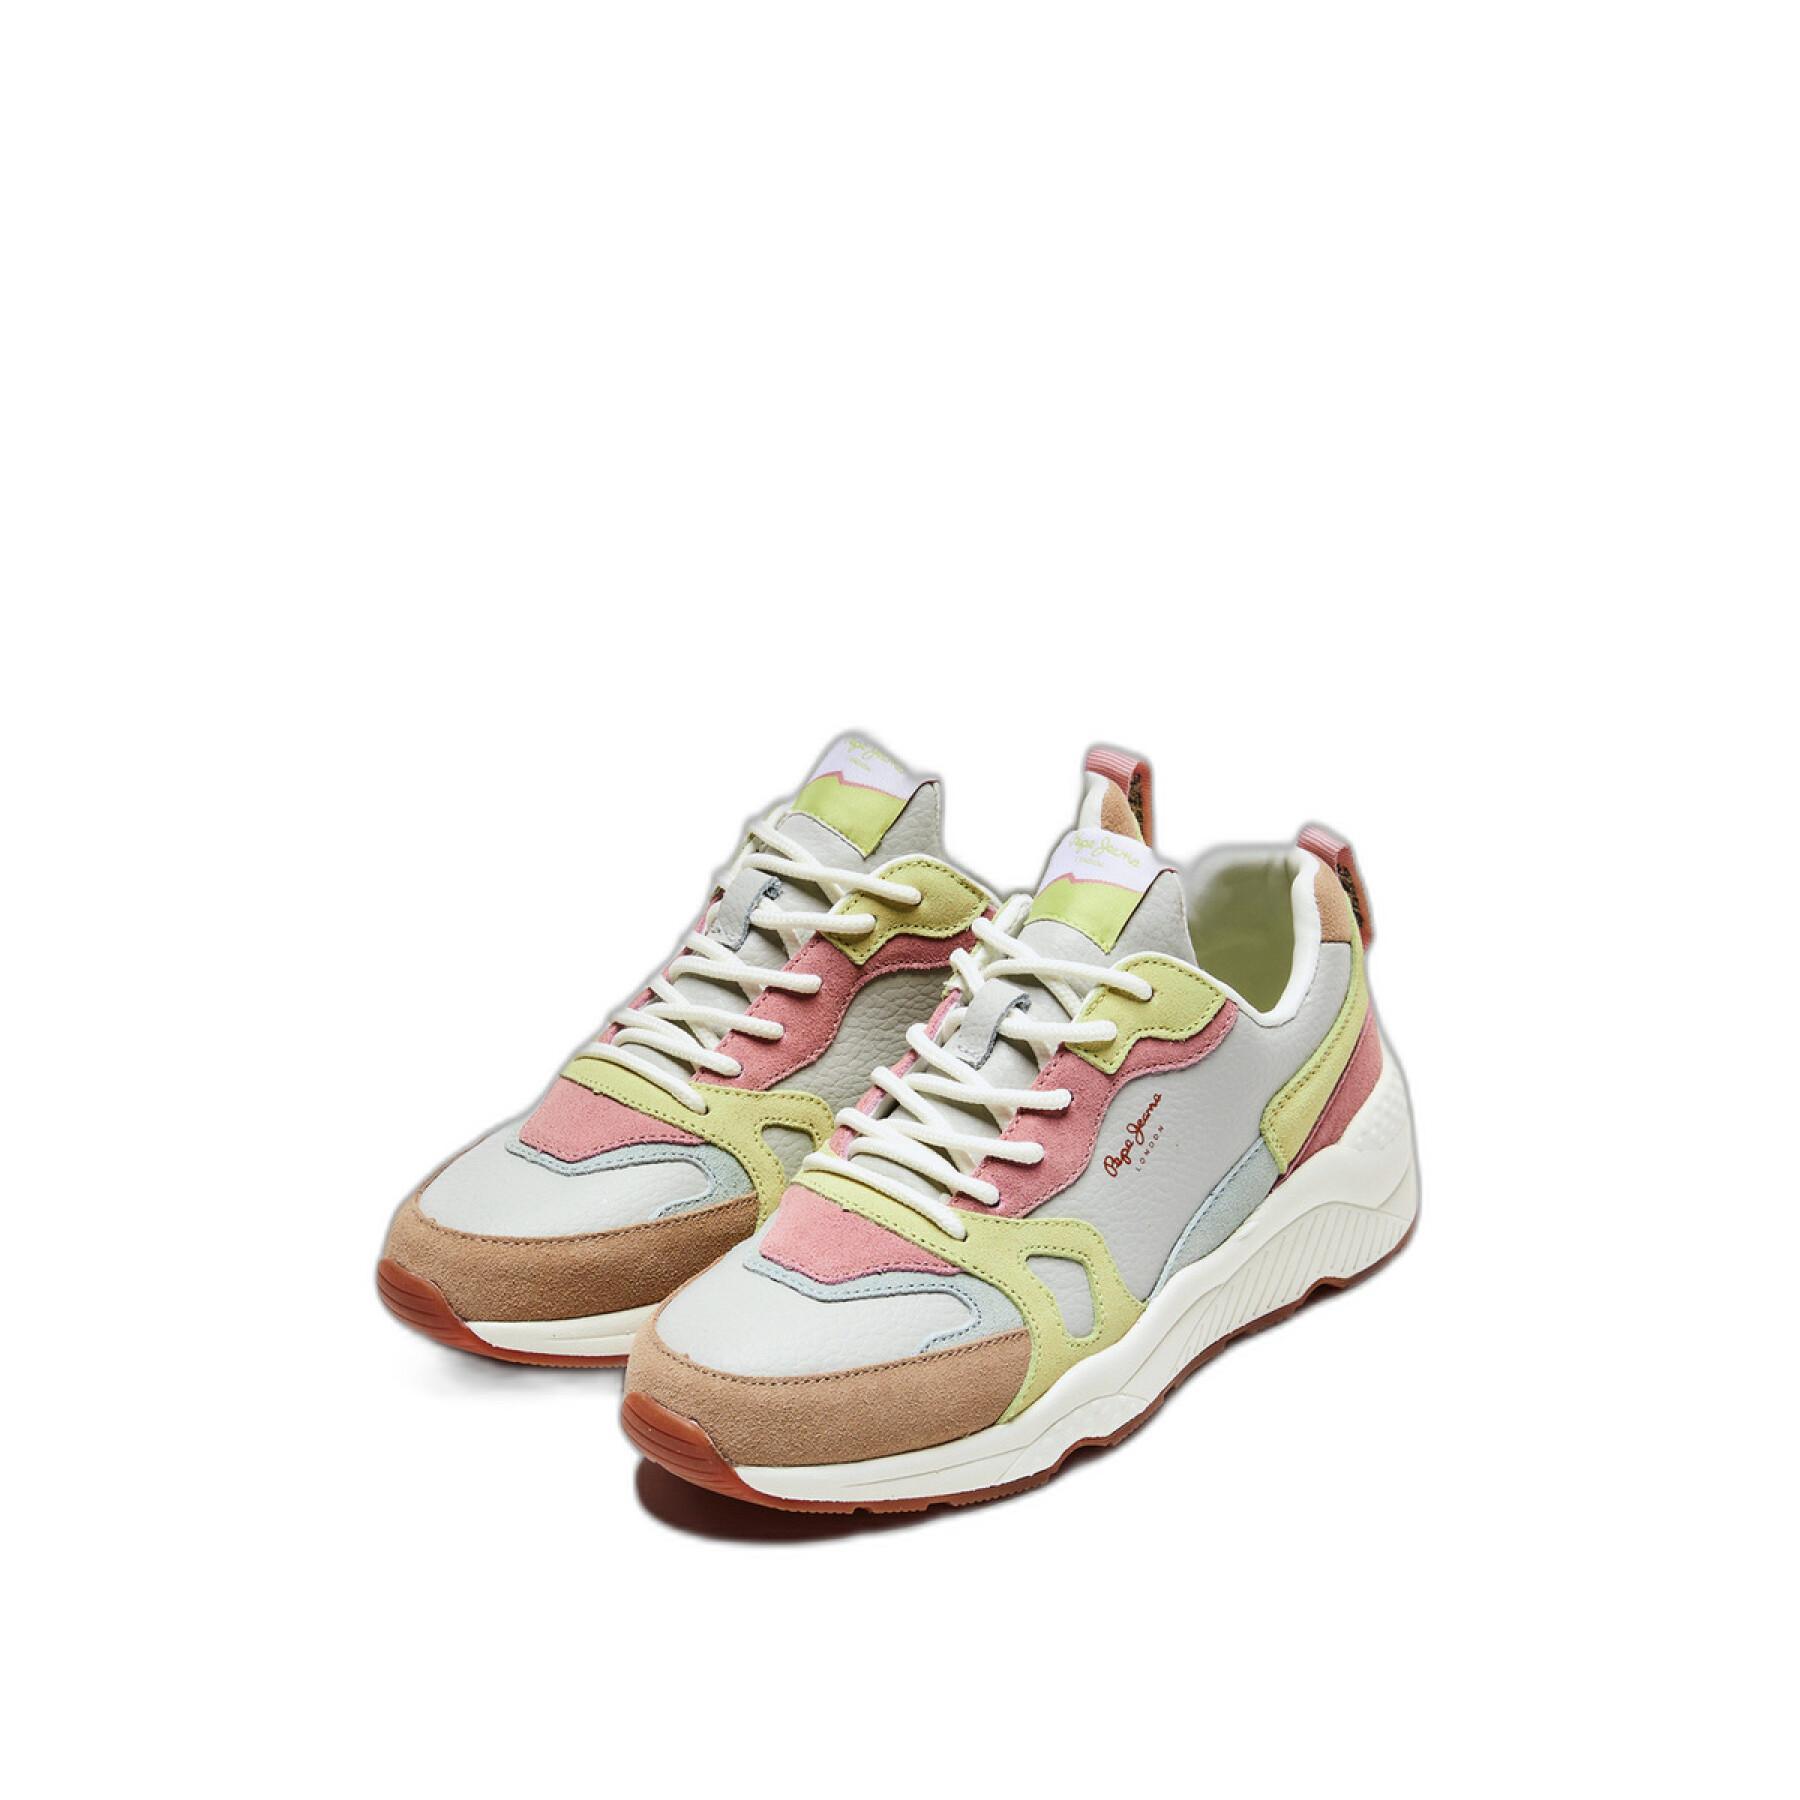 Women's sneakers Pepe Jeans Harlow Touch